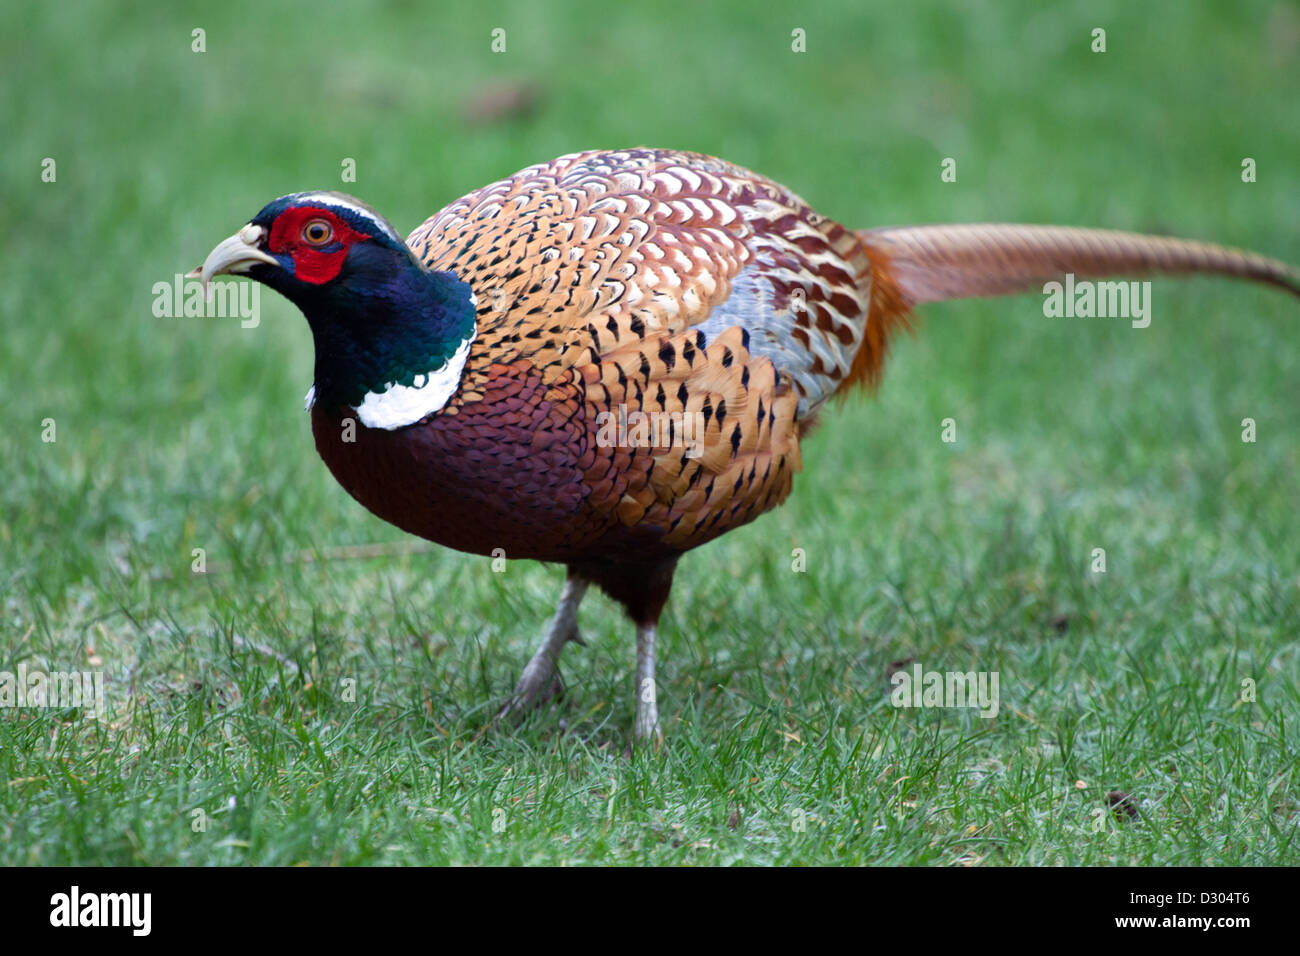 Common pheasant on Lawn in back garden Stock Photo